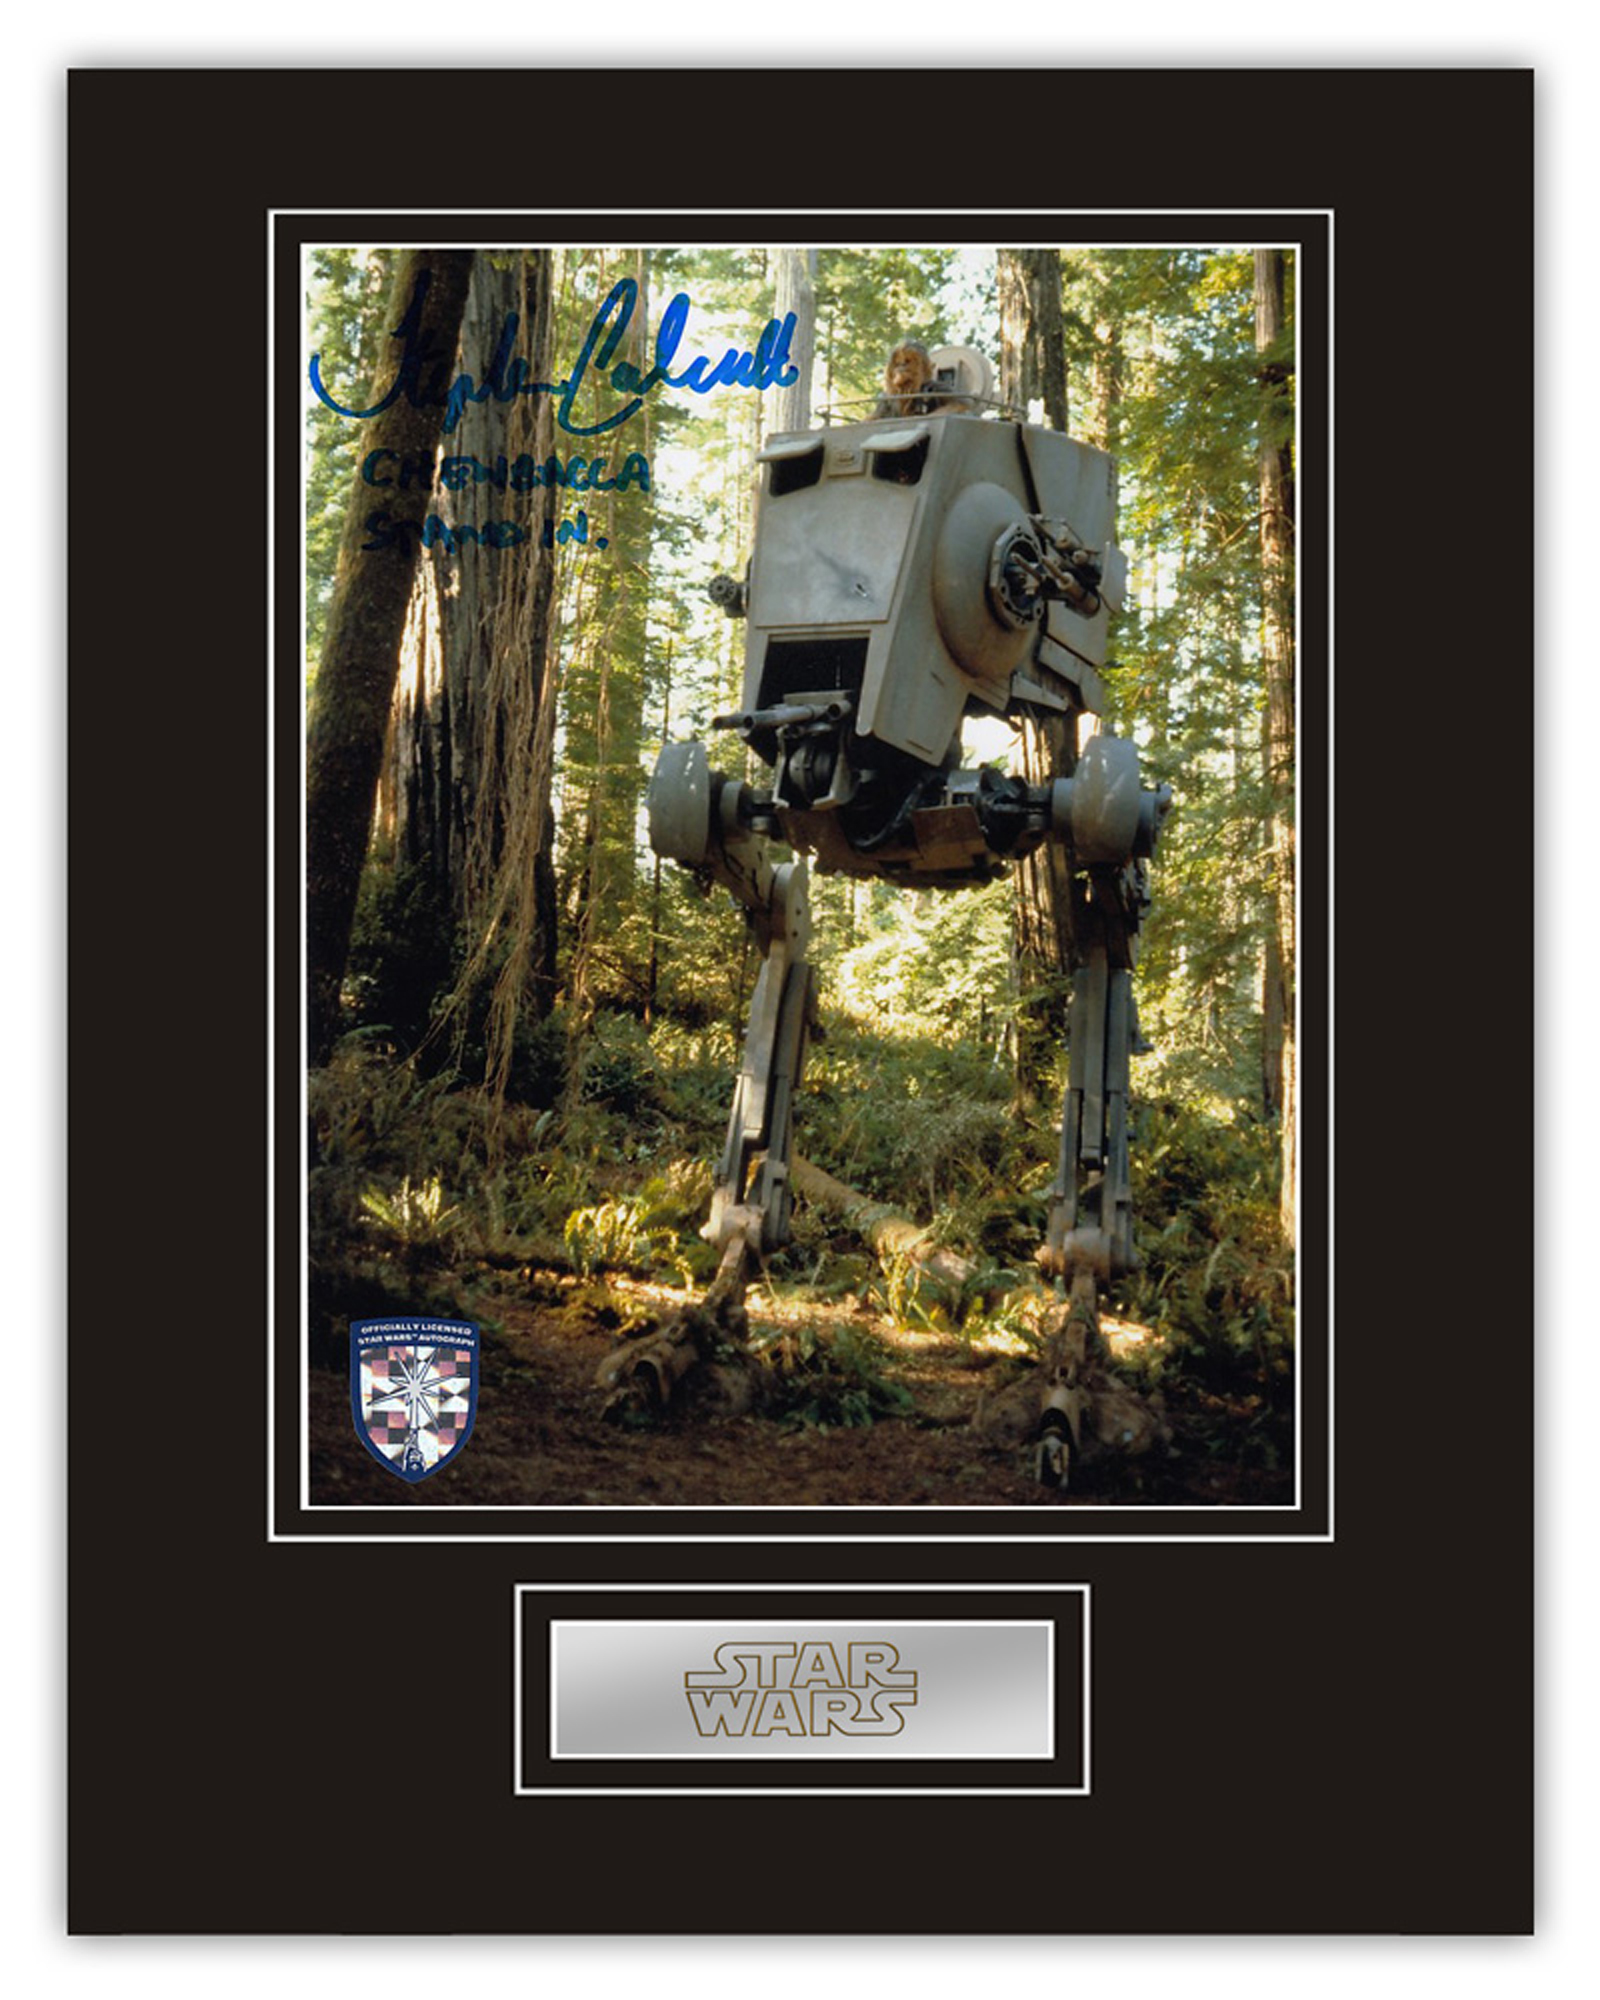 Stunning Display! Star Wars Chewbacca hand signed professionally mounted display. This beautiful